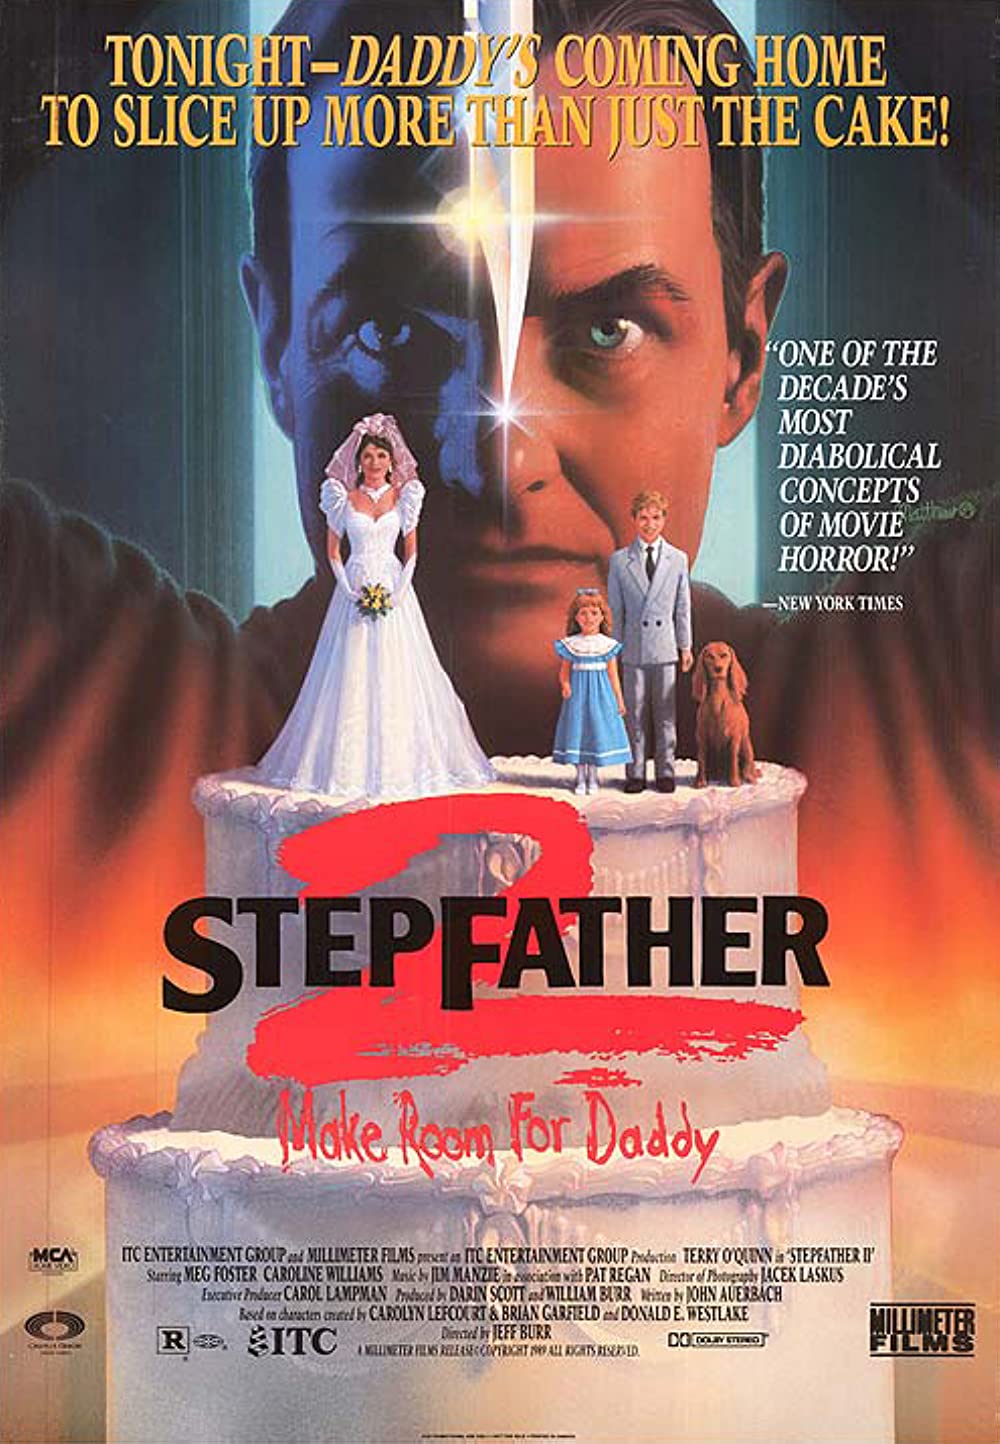 The Stepfather 2